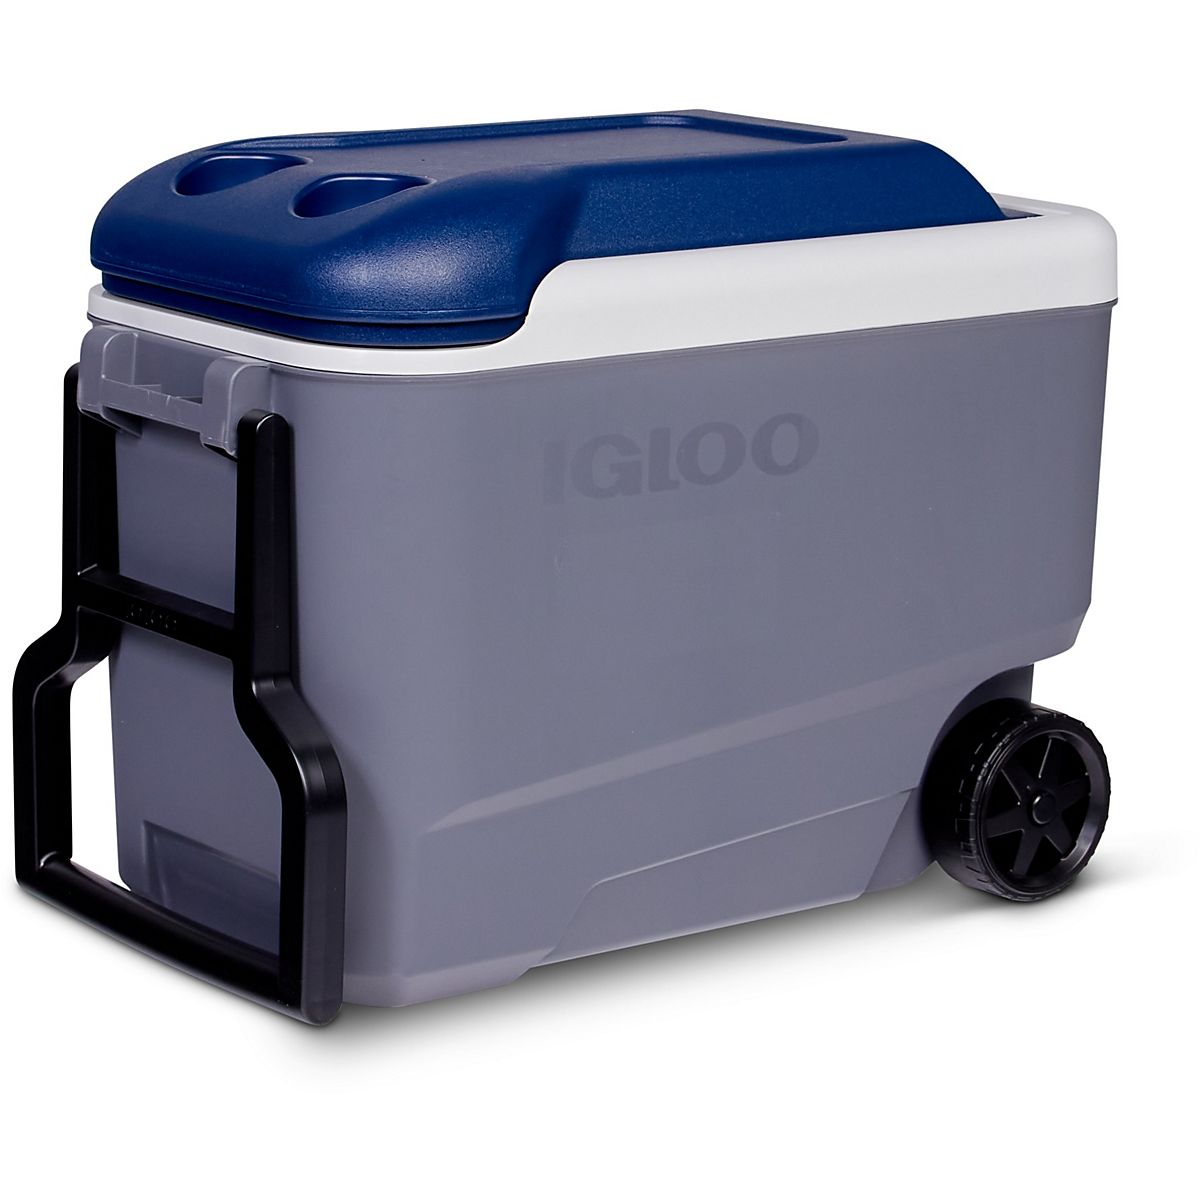 Igloo 40 qt Maxcold Roller Cooler | Free Shipping at Academy